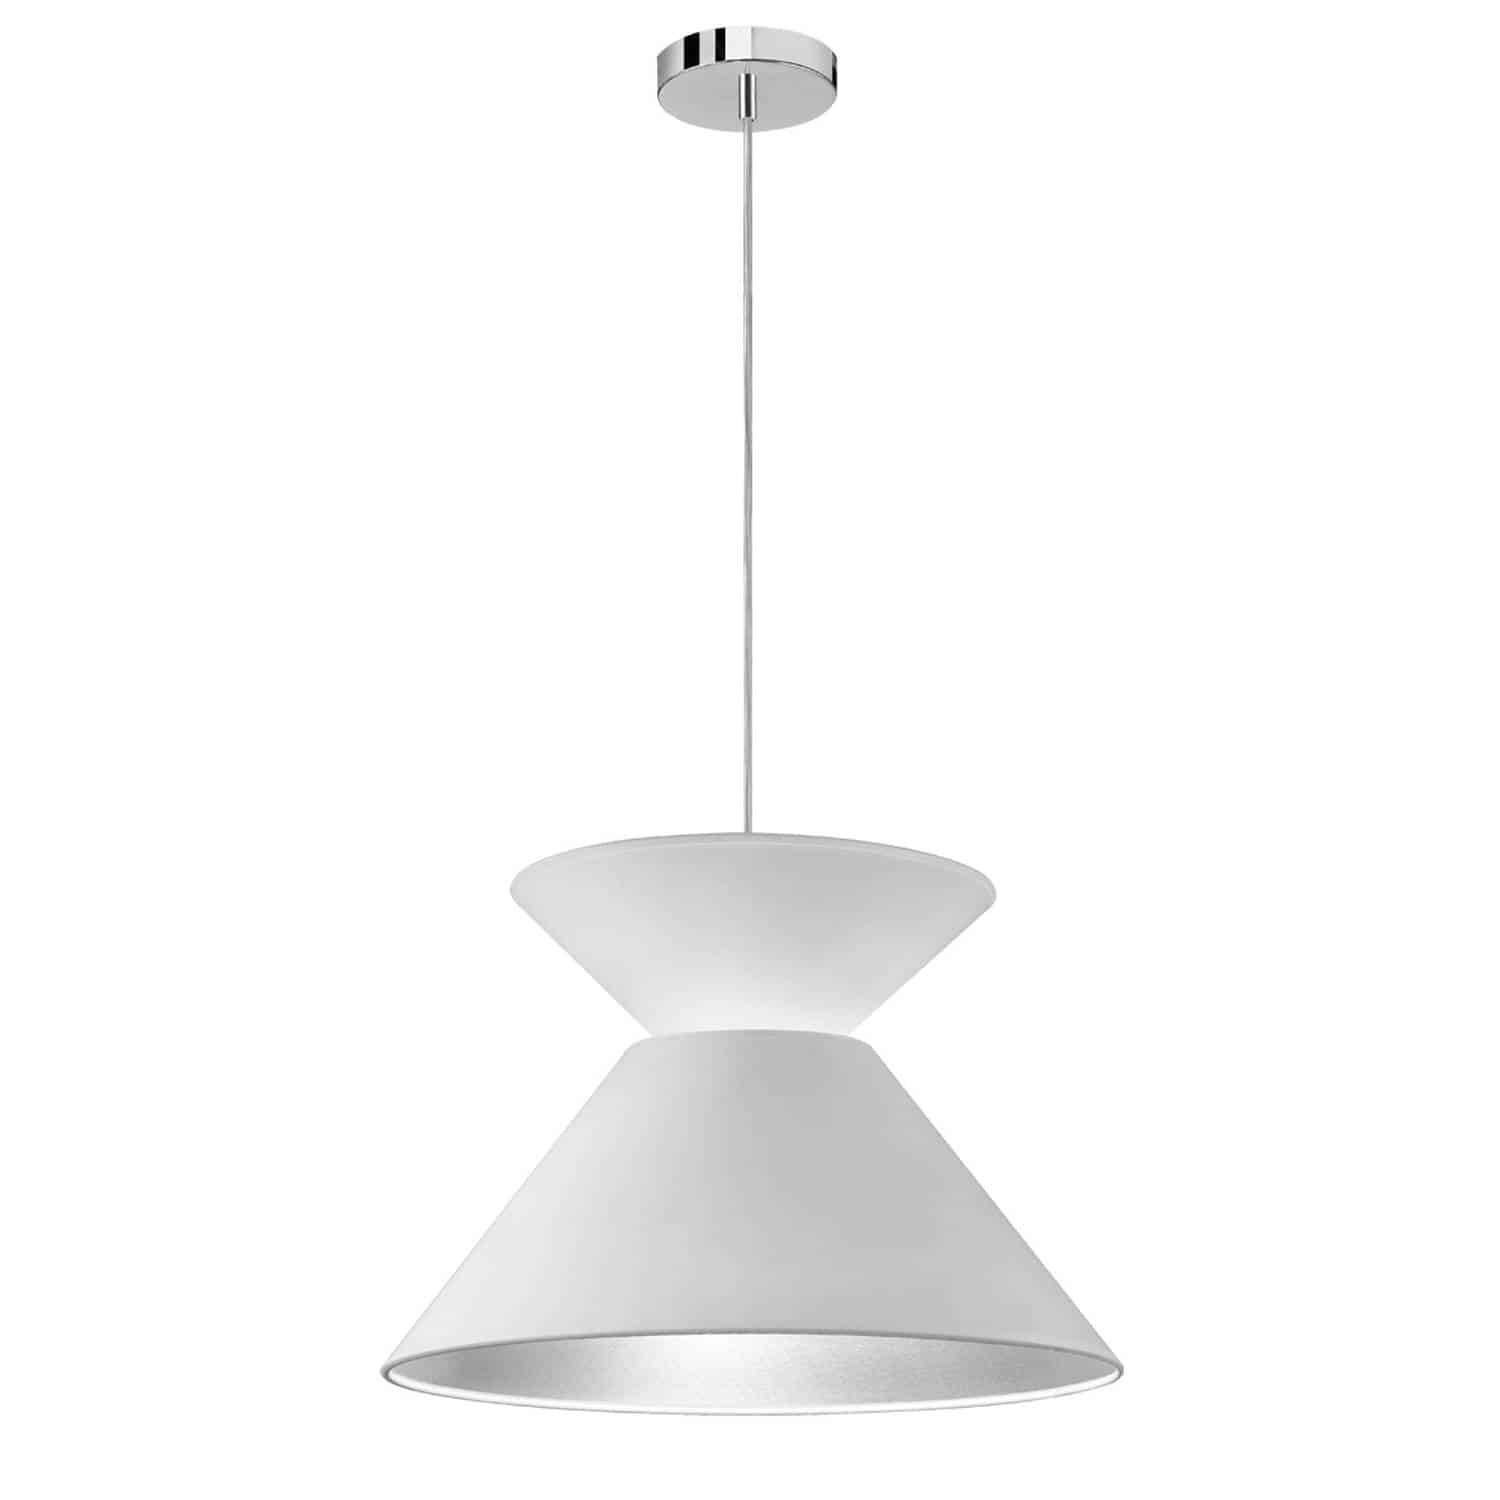 1 Light Patricia Pendant, Polished Chrome with White/Silver Shade